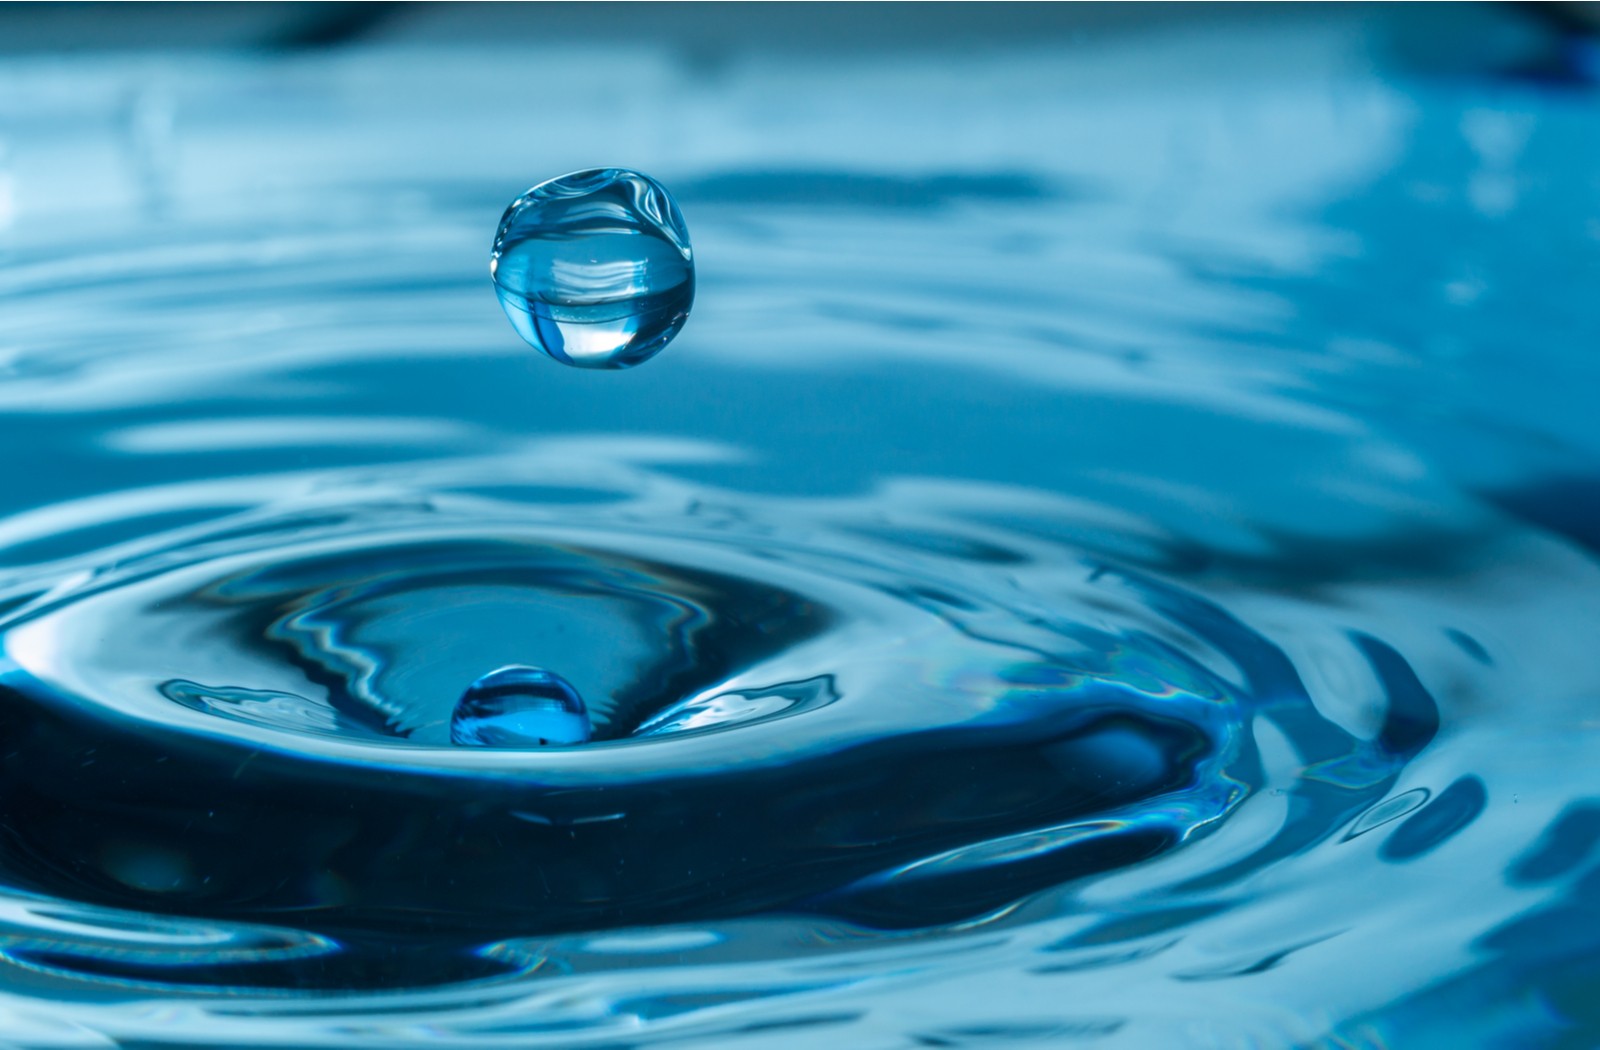 Zoomed perspective of a single blue spherical water drop about to fall into a body of water that is already rippling